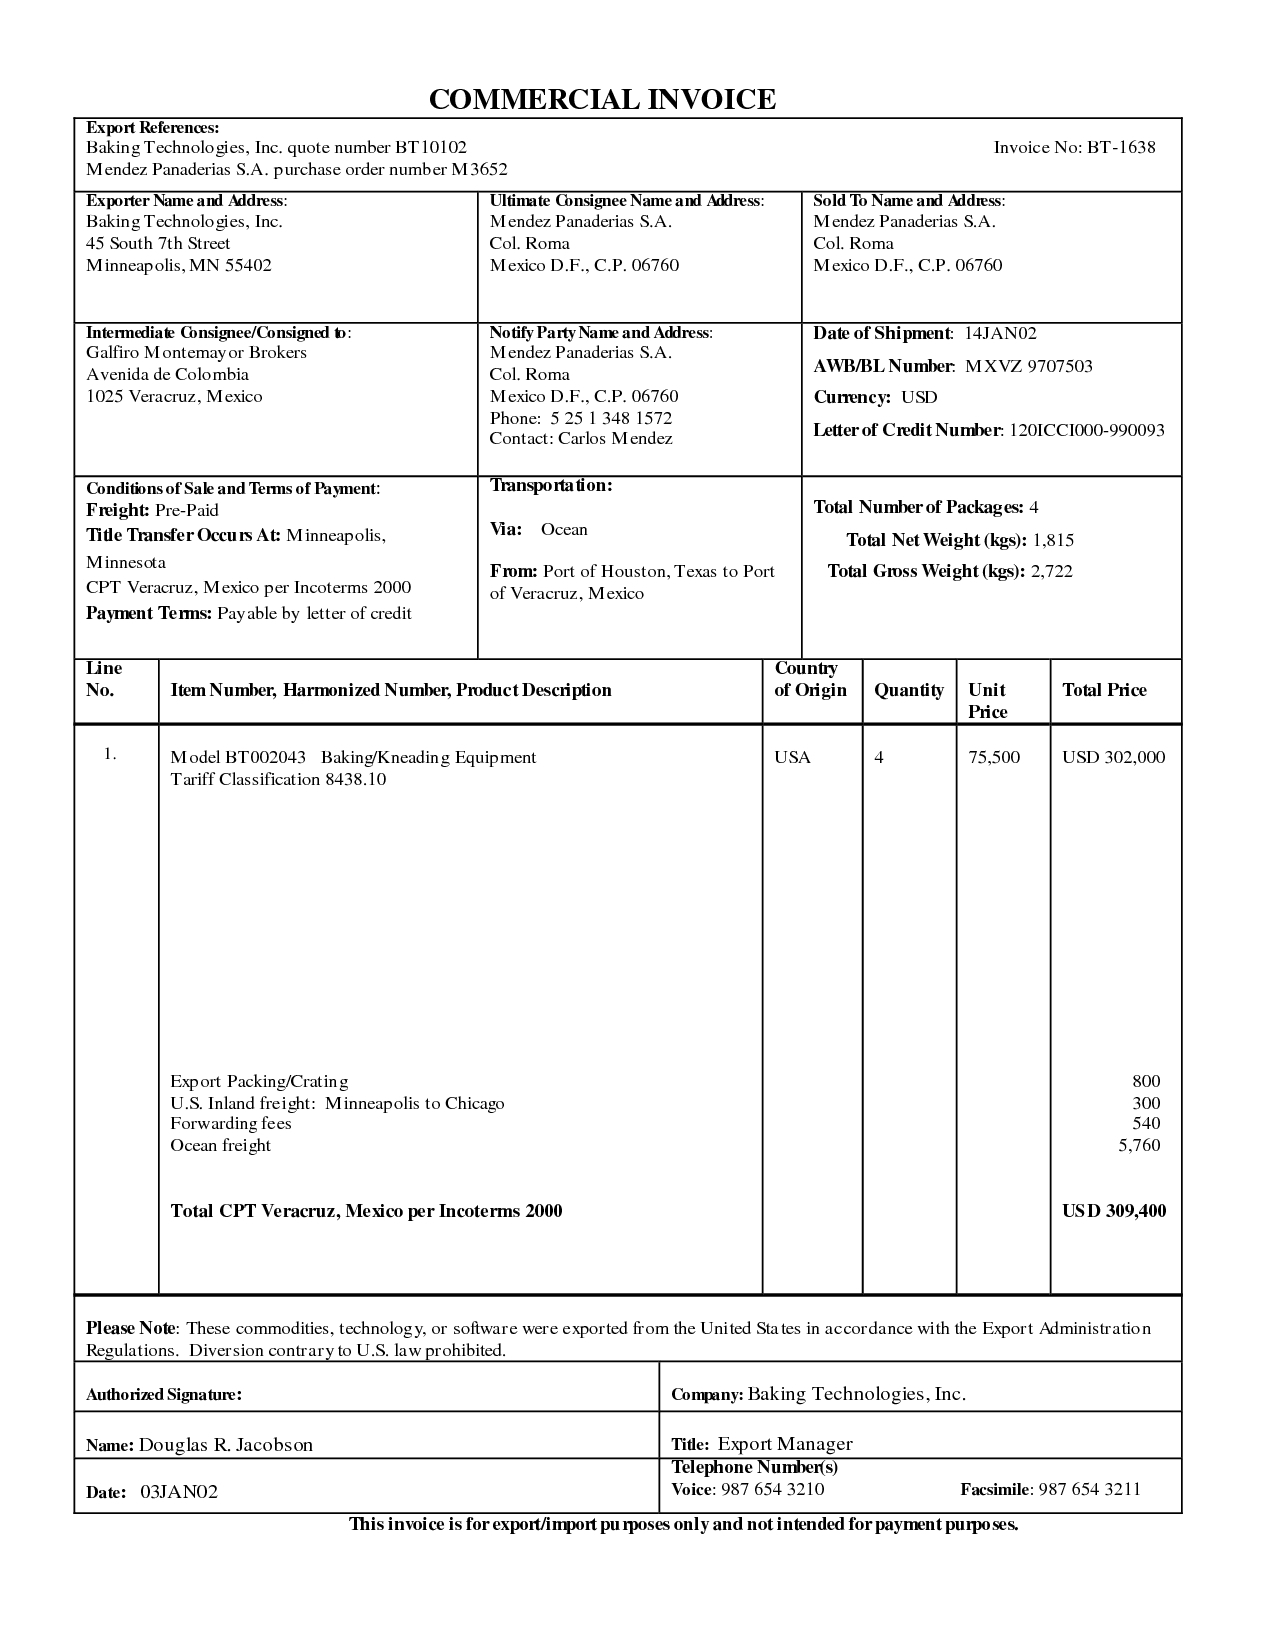 export commercial invoice apcc2017 commercial documents for export